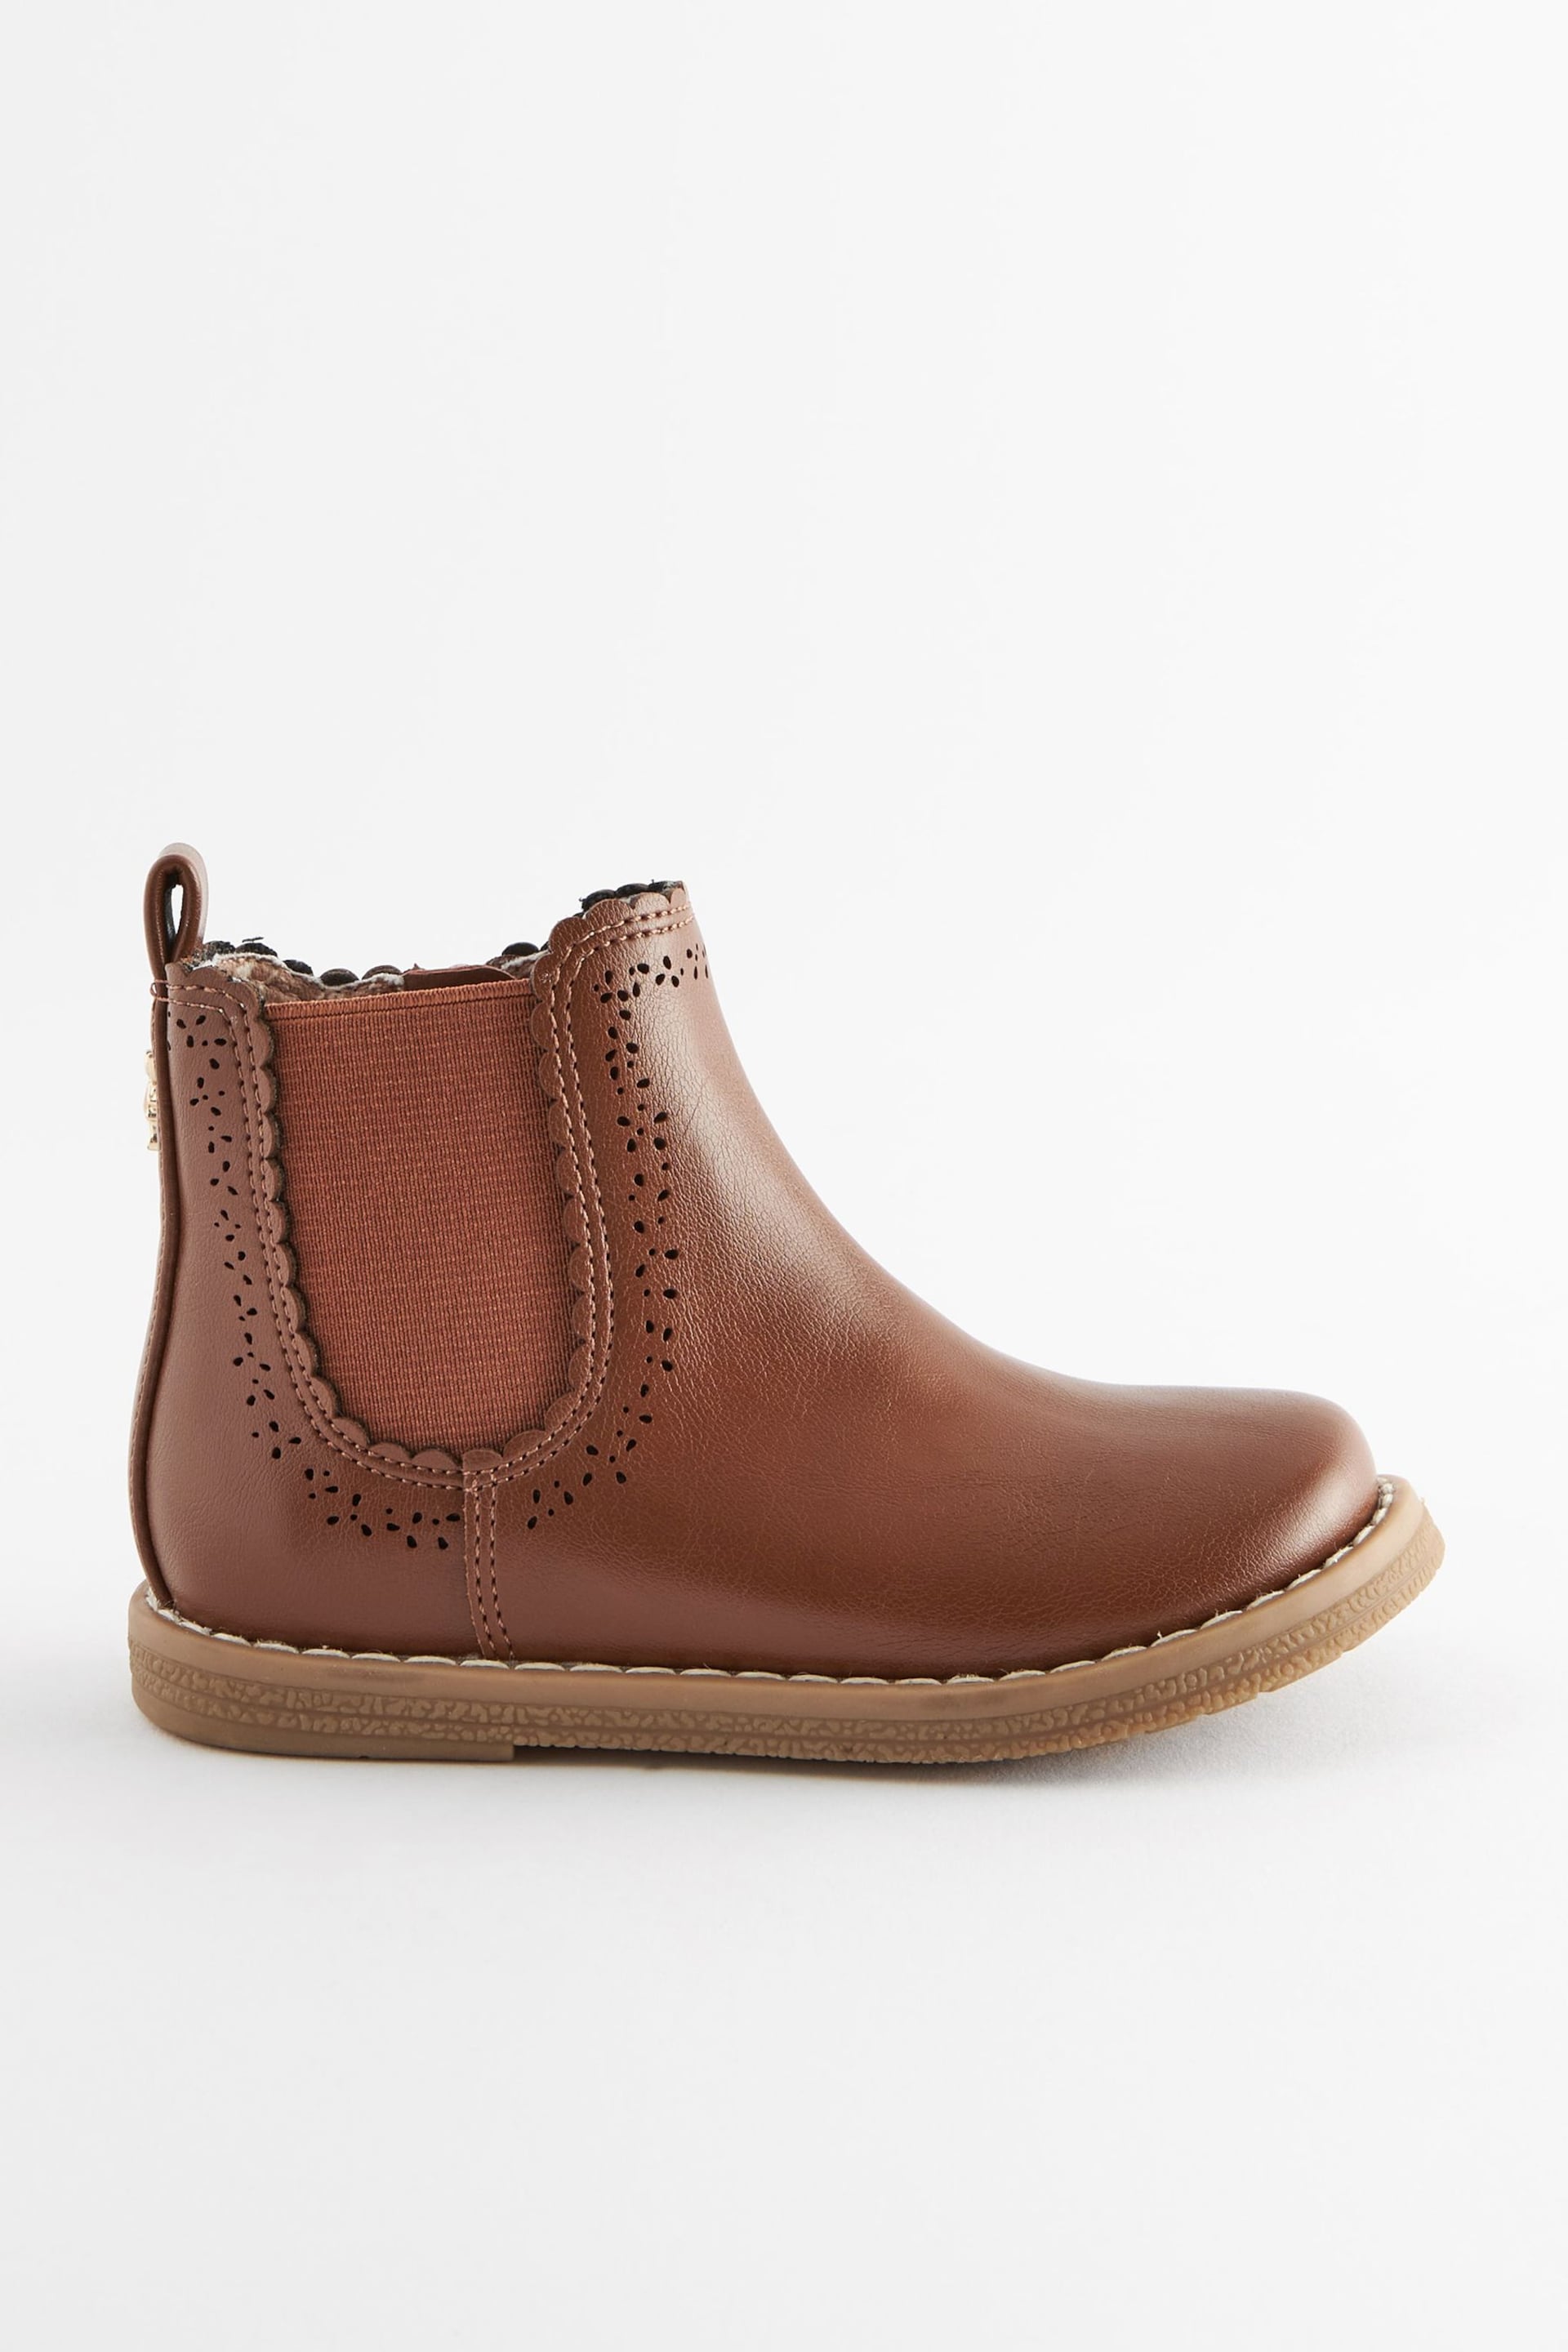 Tan Brown Standard Fit (F) Chelsea Boots - Image 2 of 5